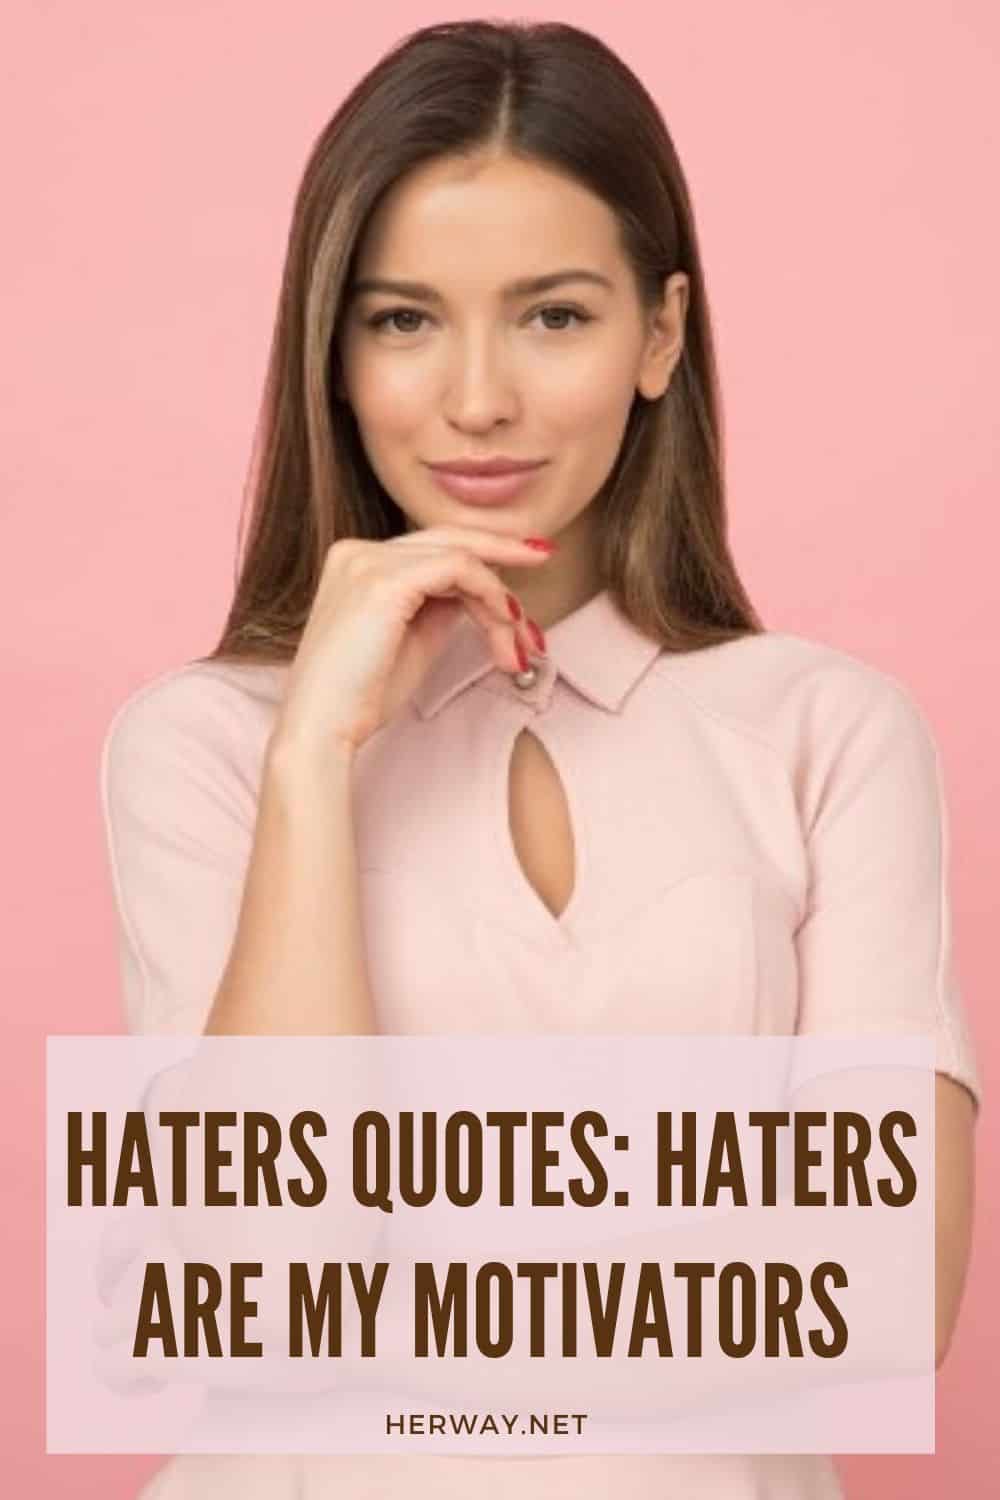 Haters Quotes: Haters Are My Motivators pinterest